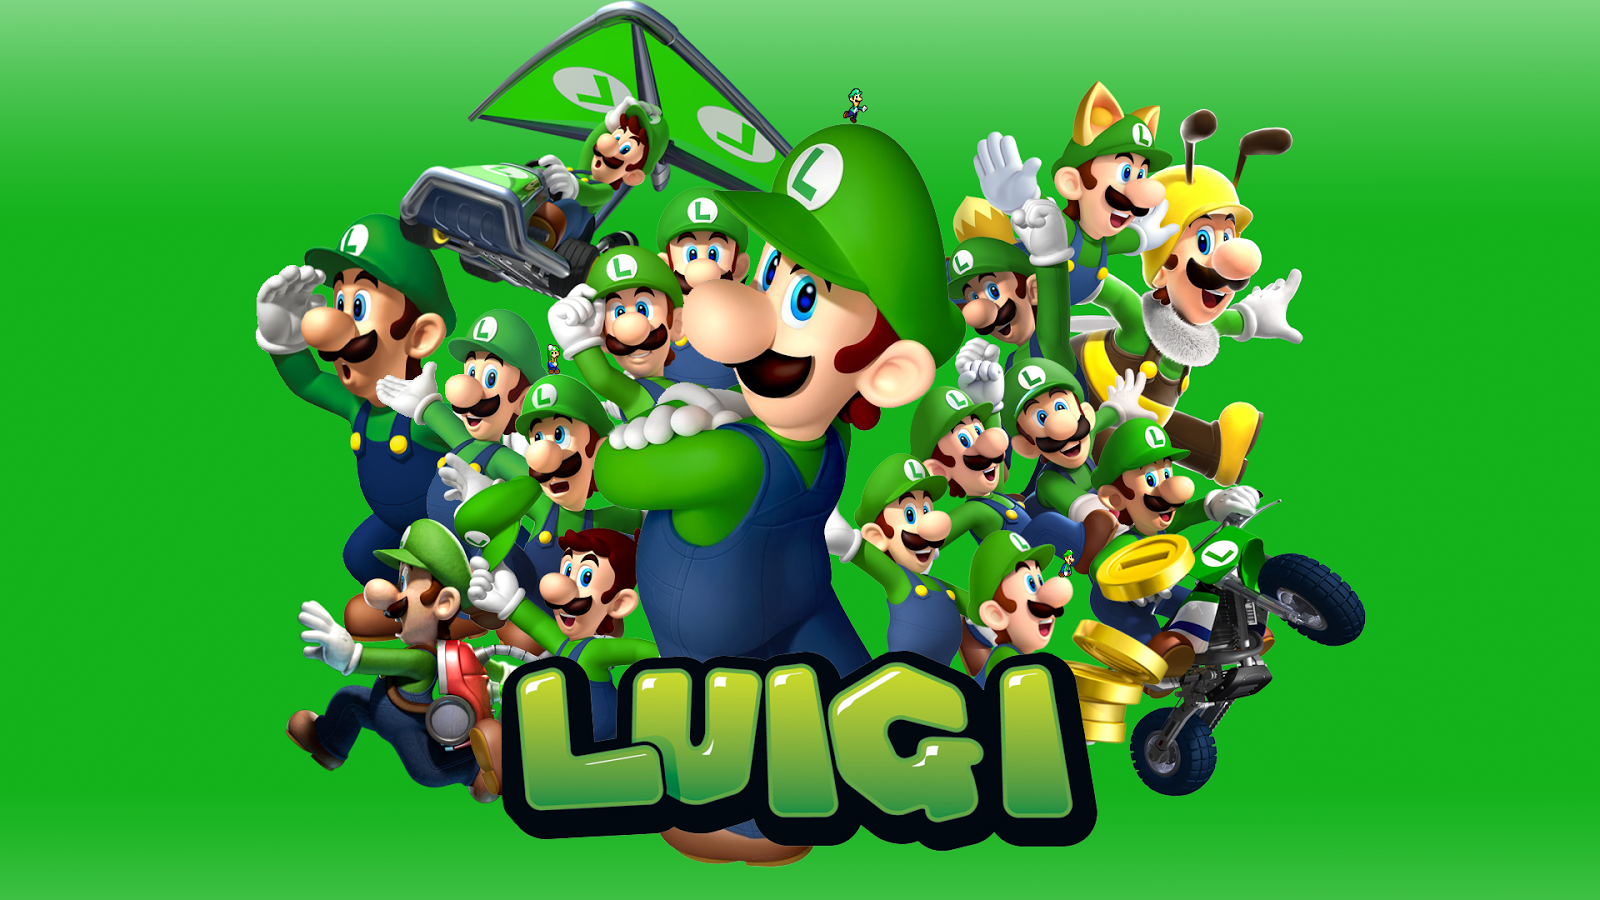 Anime and Games! The Year of Luigi CD Download!